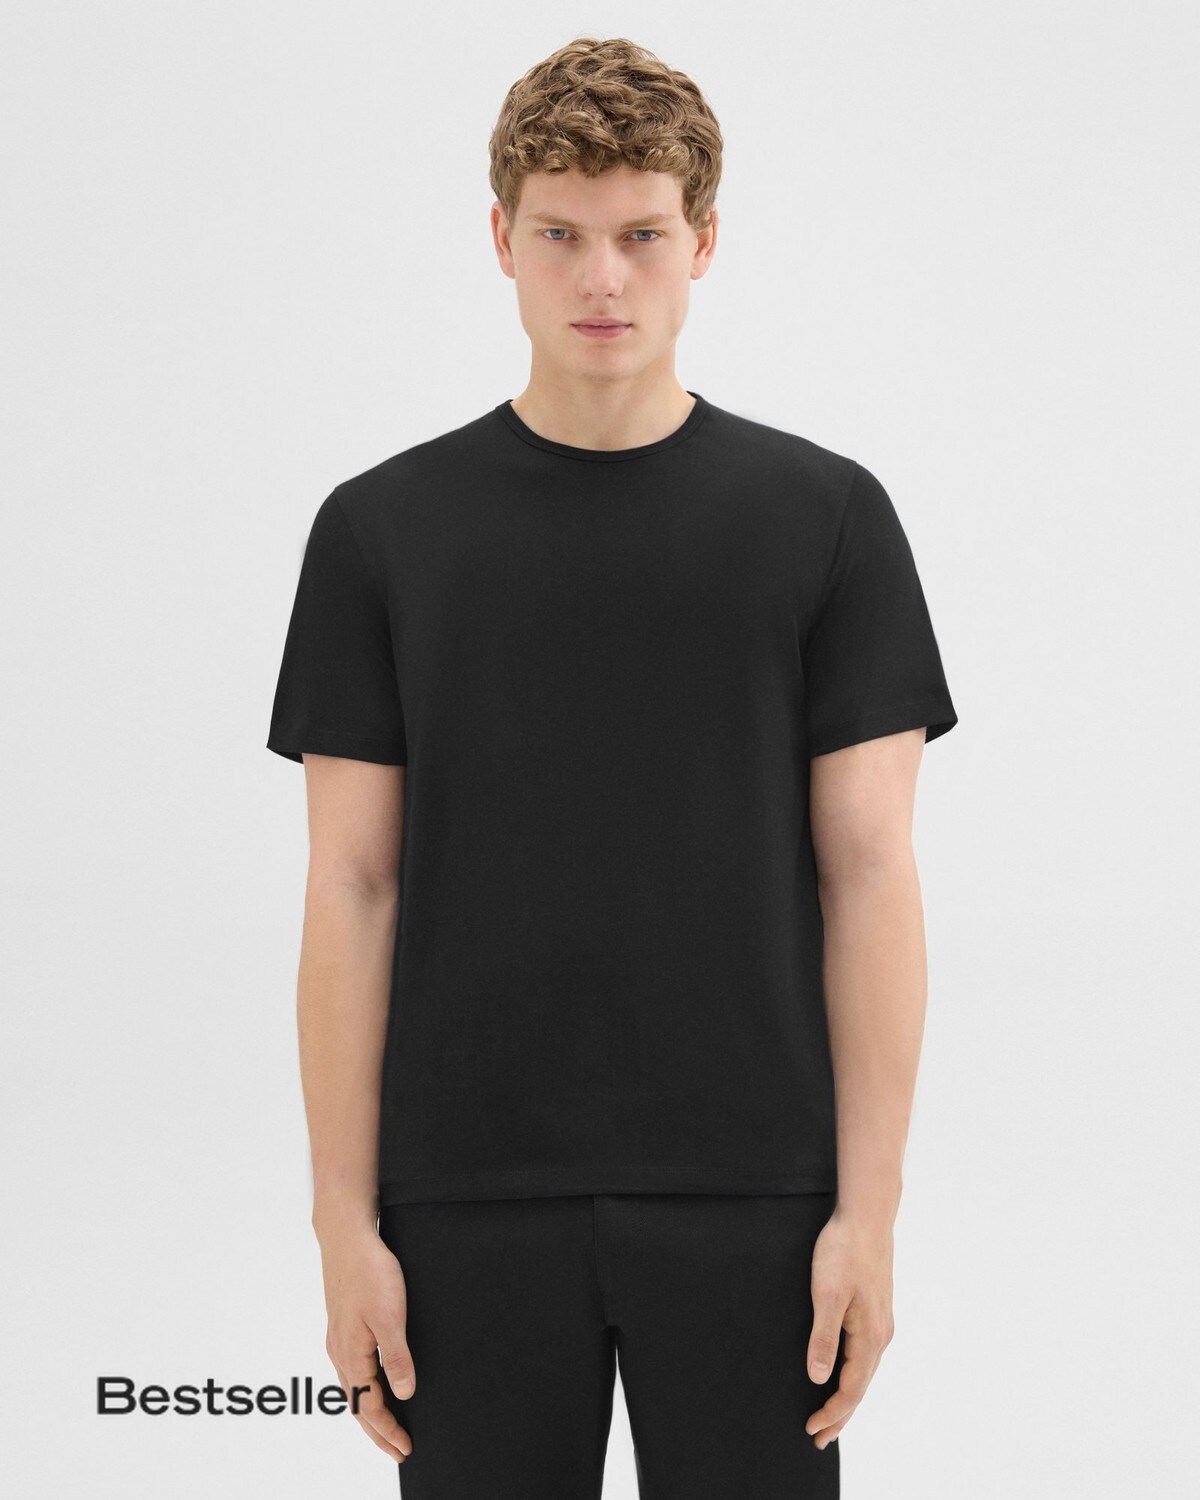 Precise Tee in Cotton Jersey